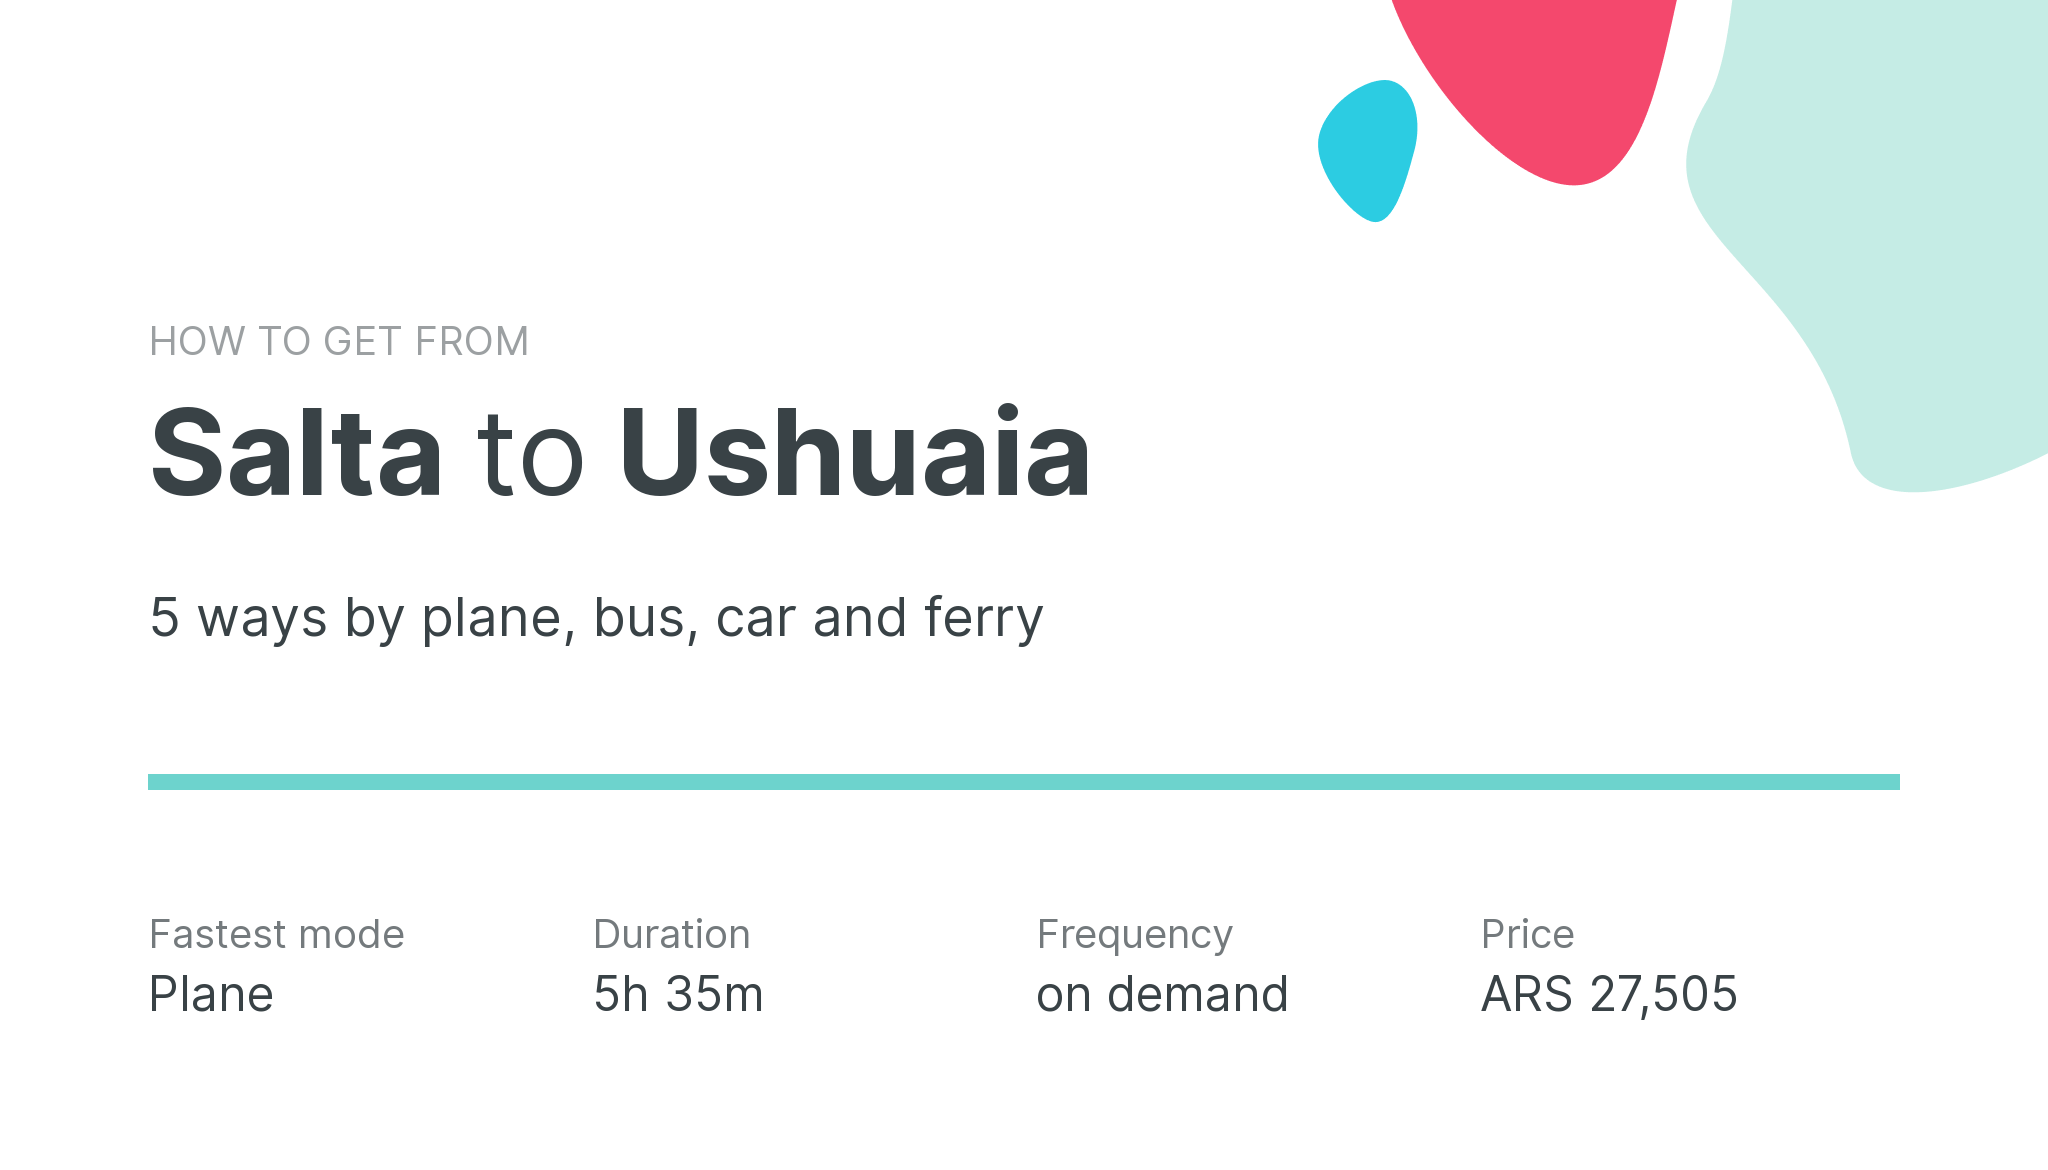 How do I get from Salta to Ushuaia